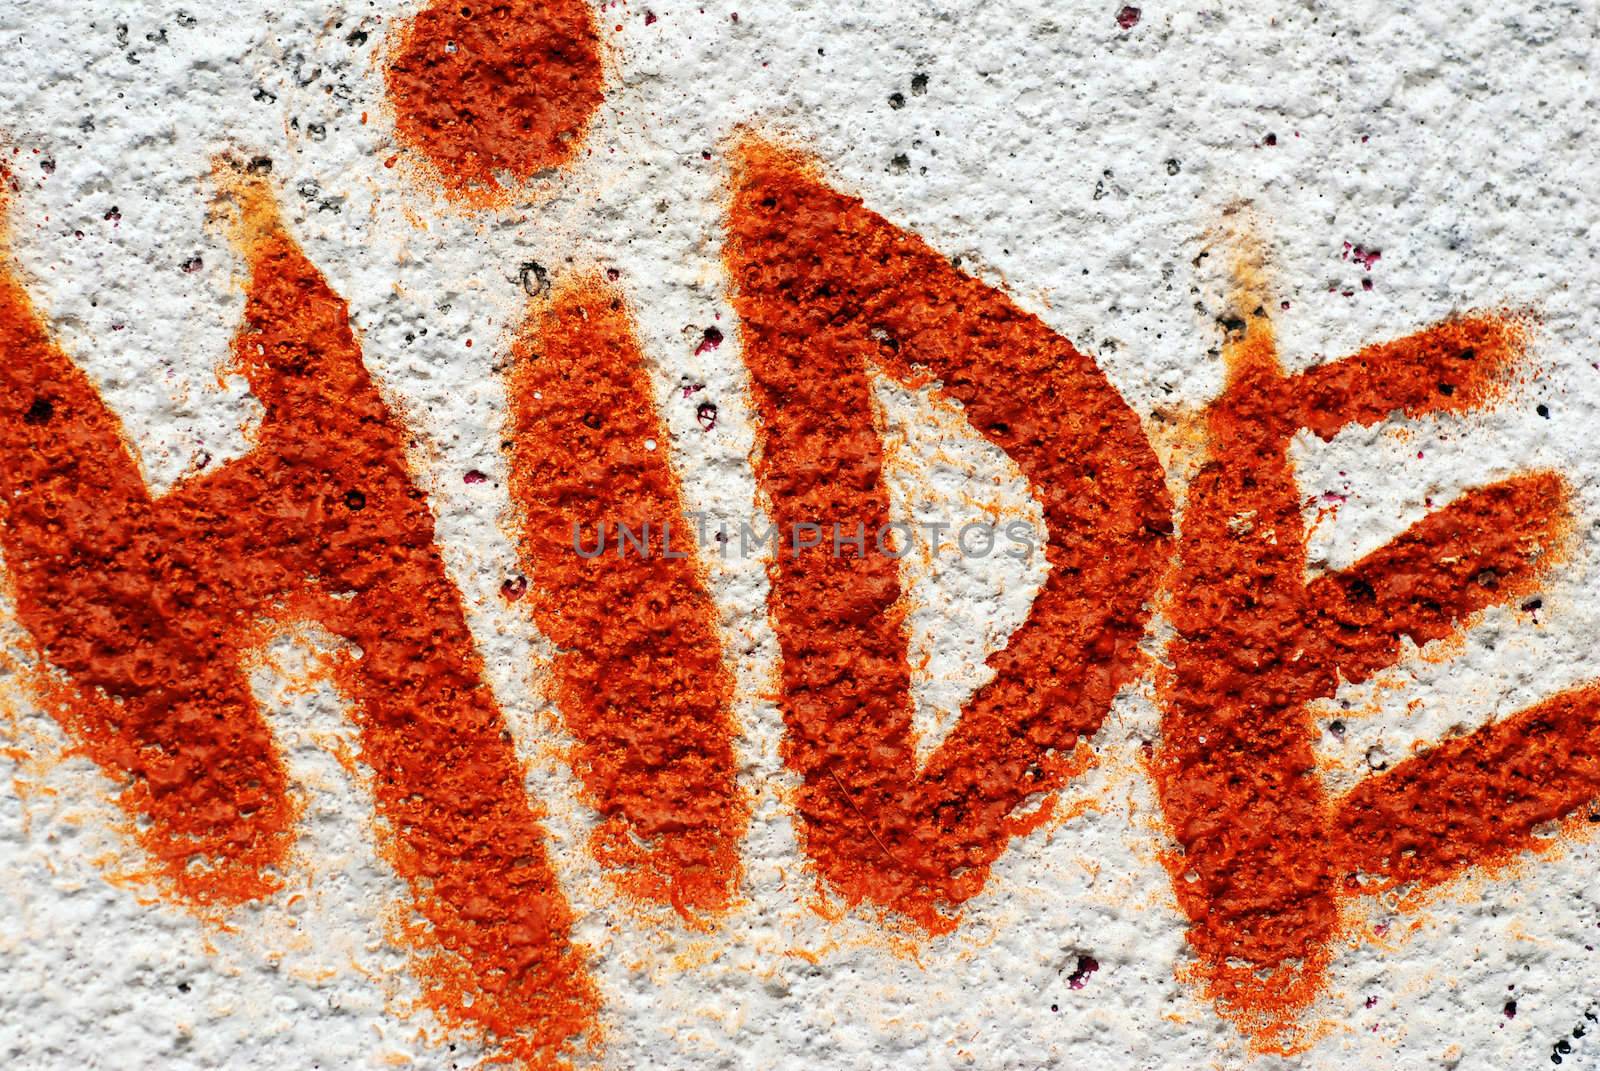 A photograph of the word Hide spray painted on a public wall